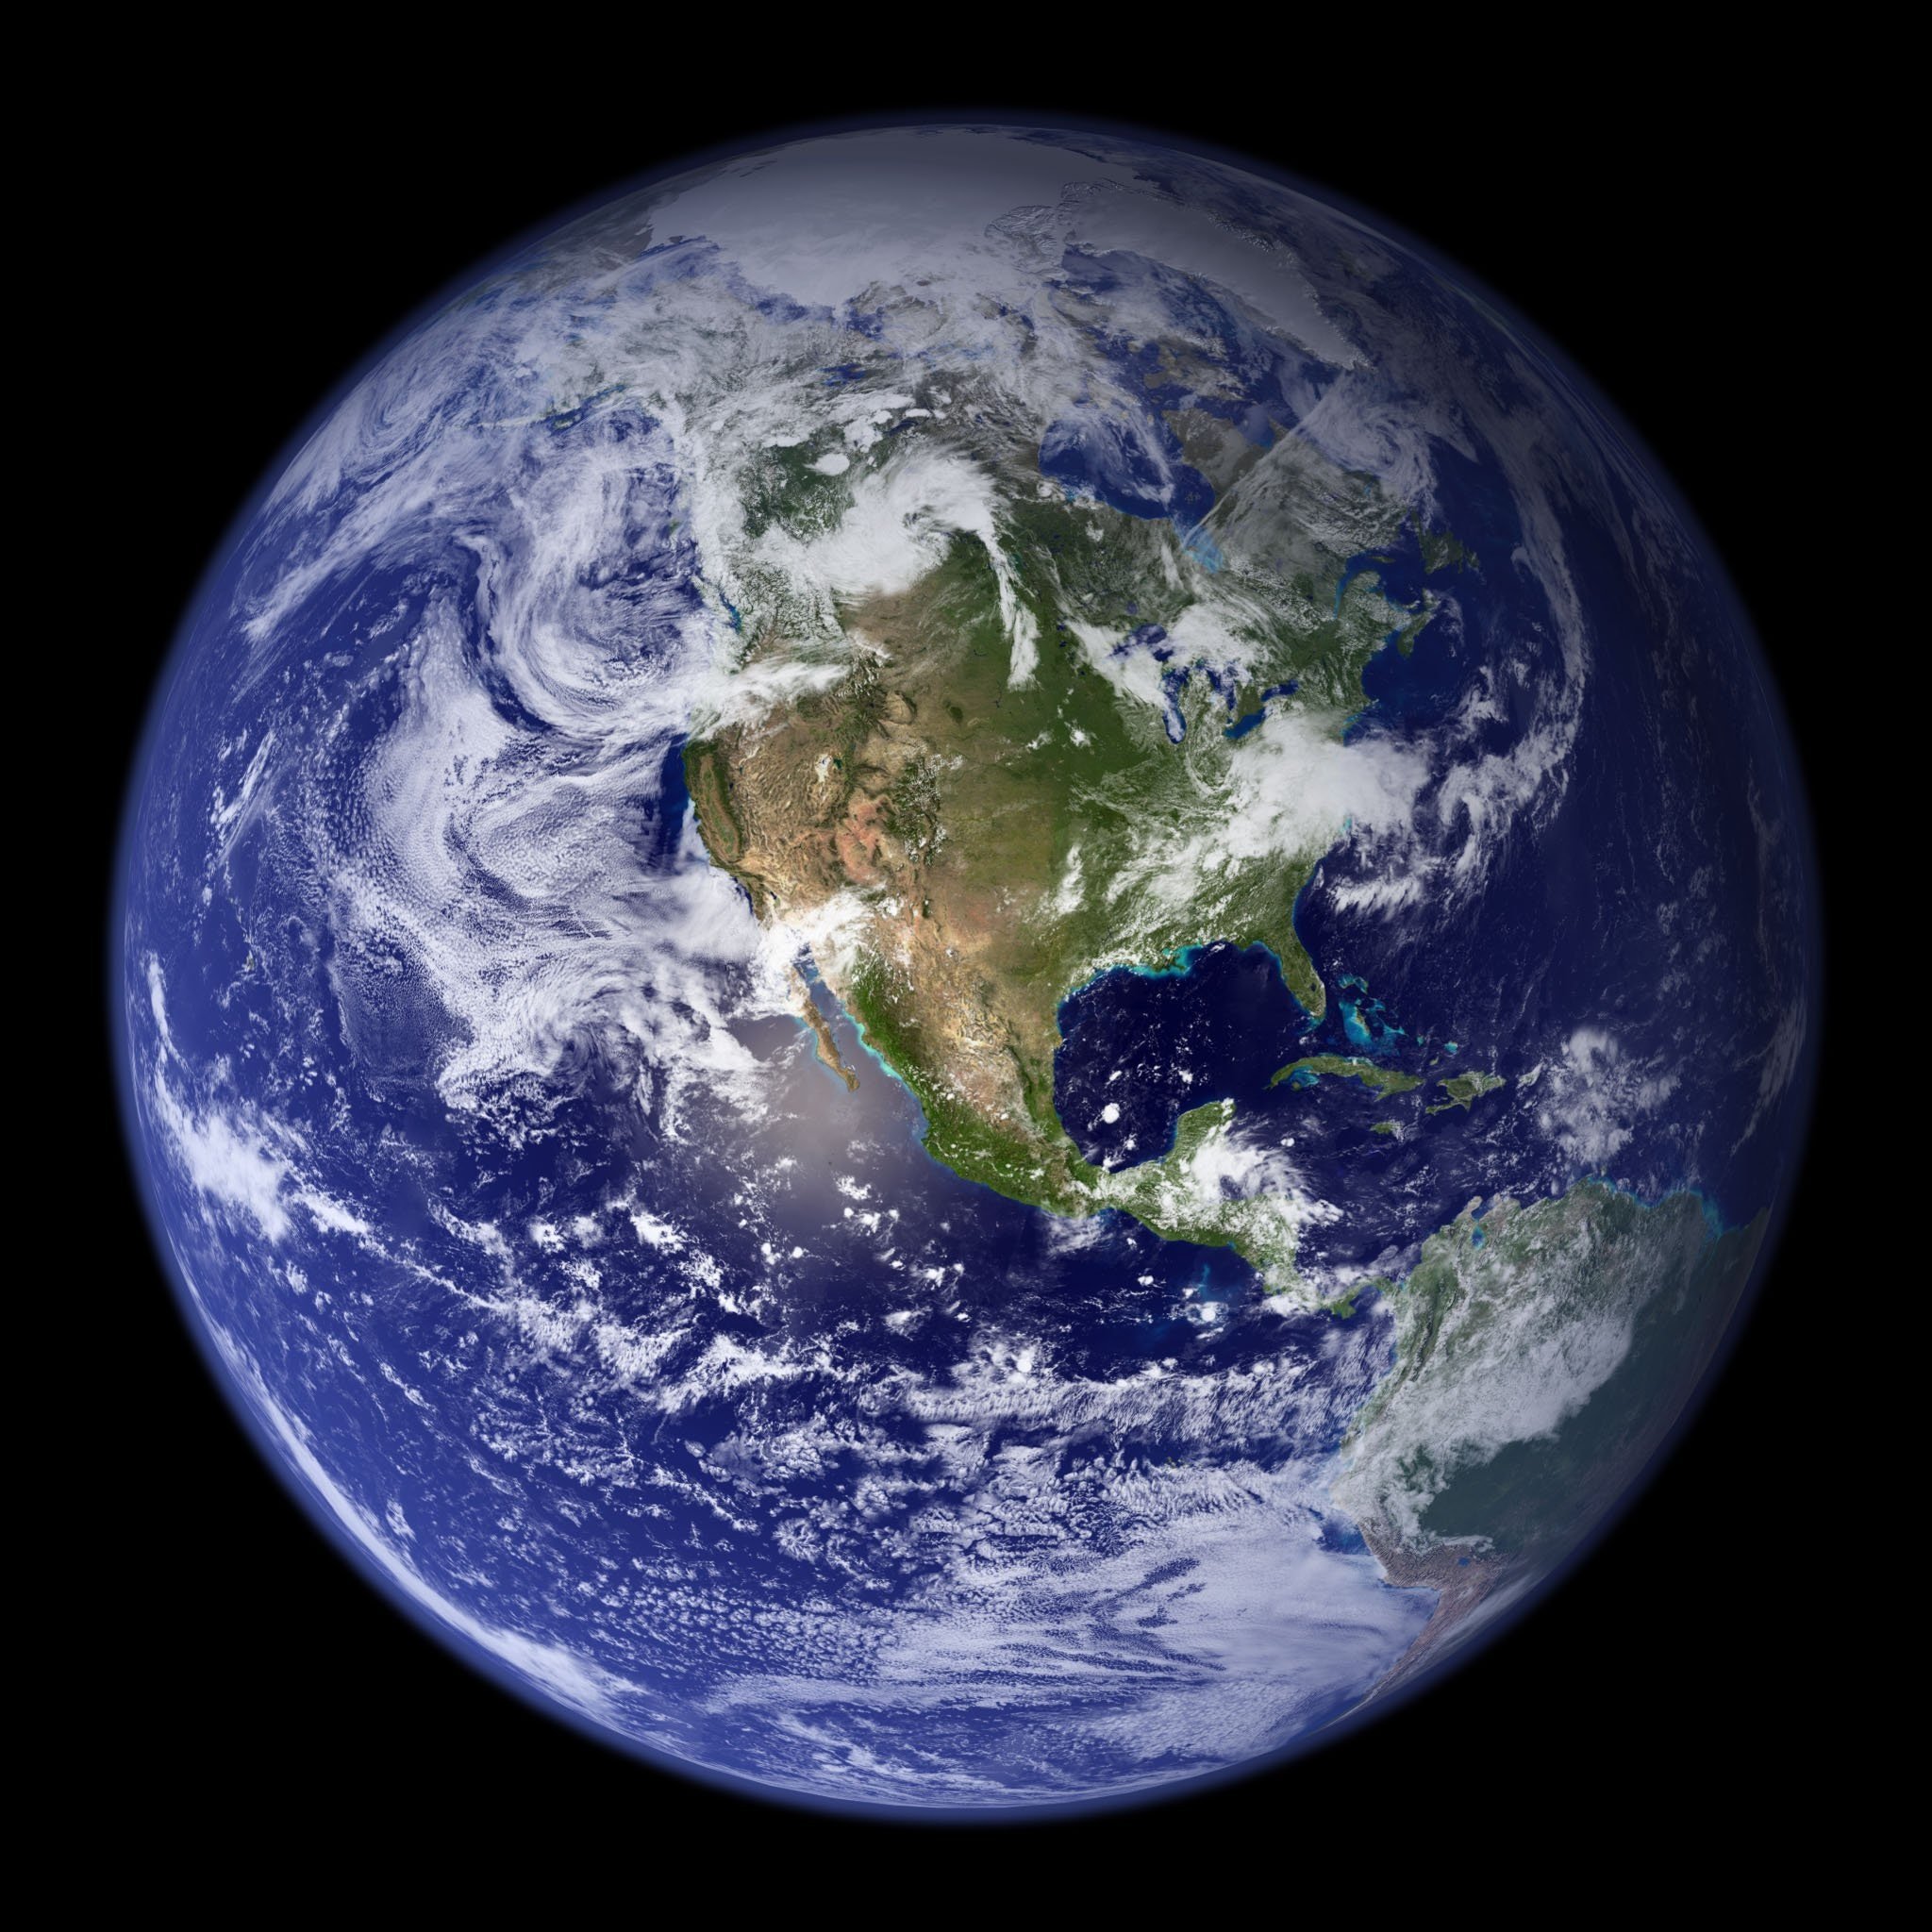 An image of planet earth | Photo: Pixabay